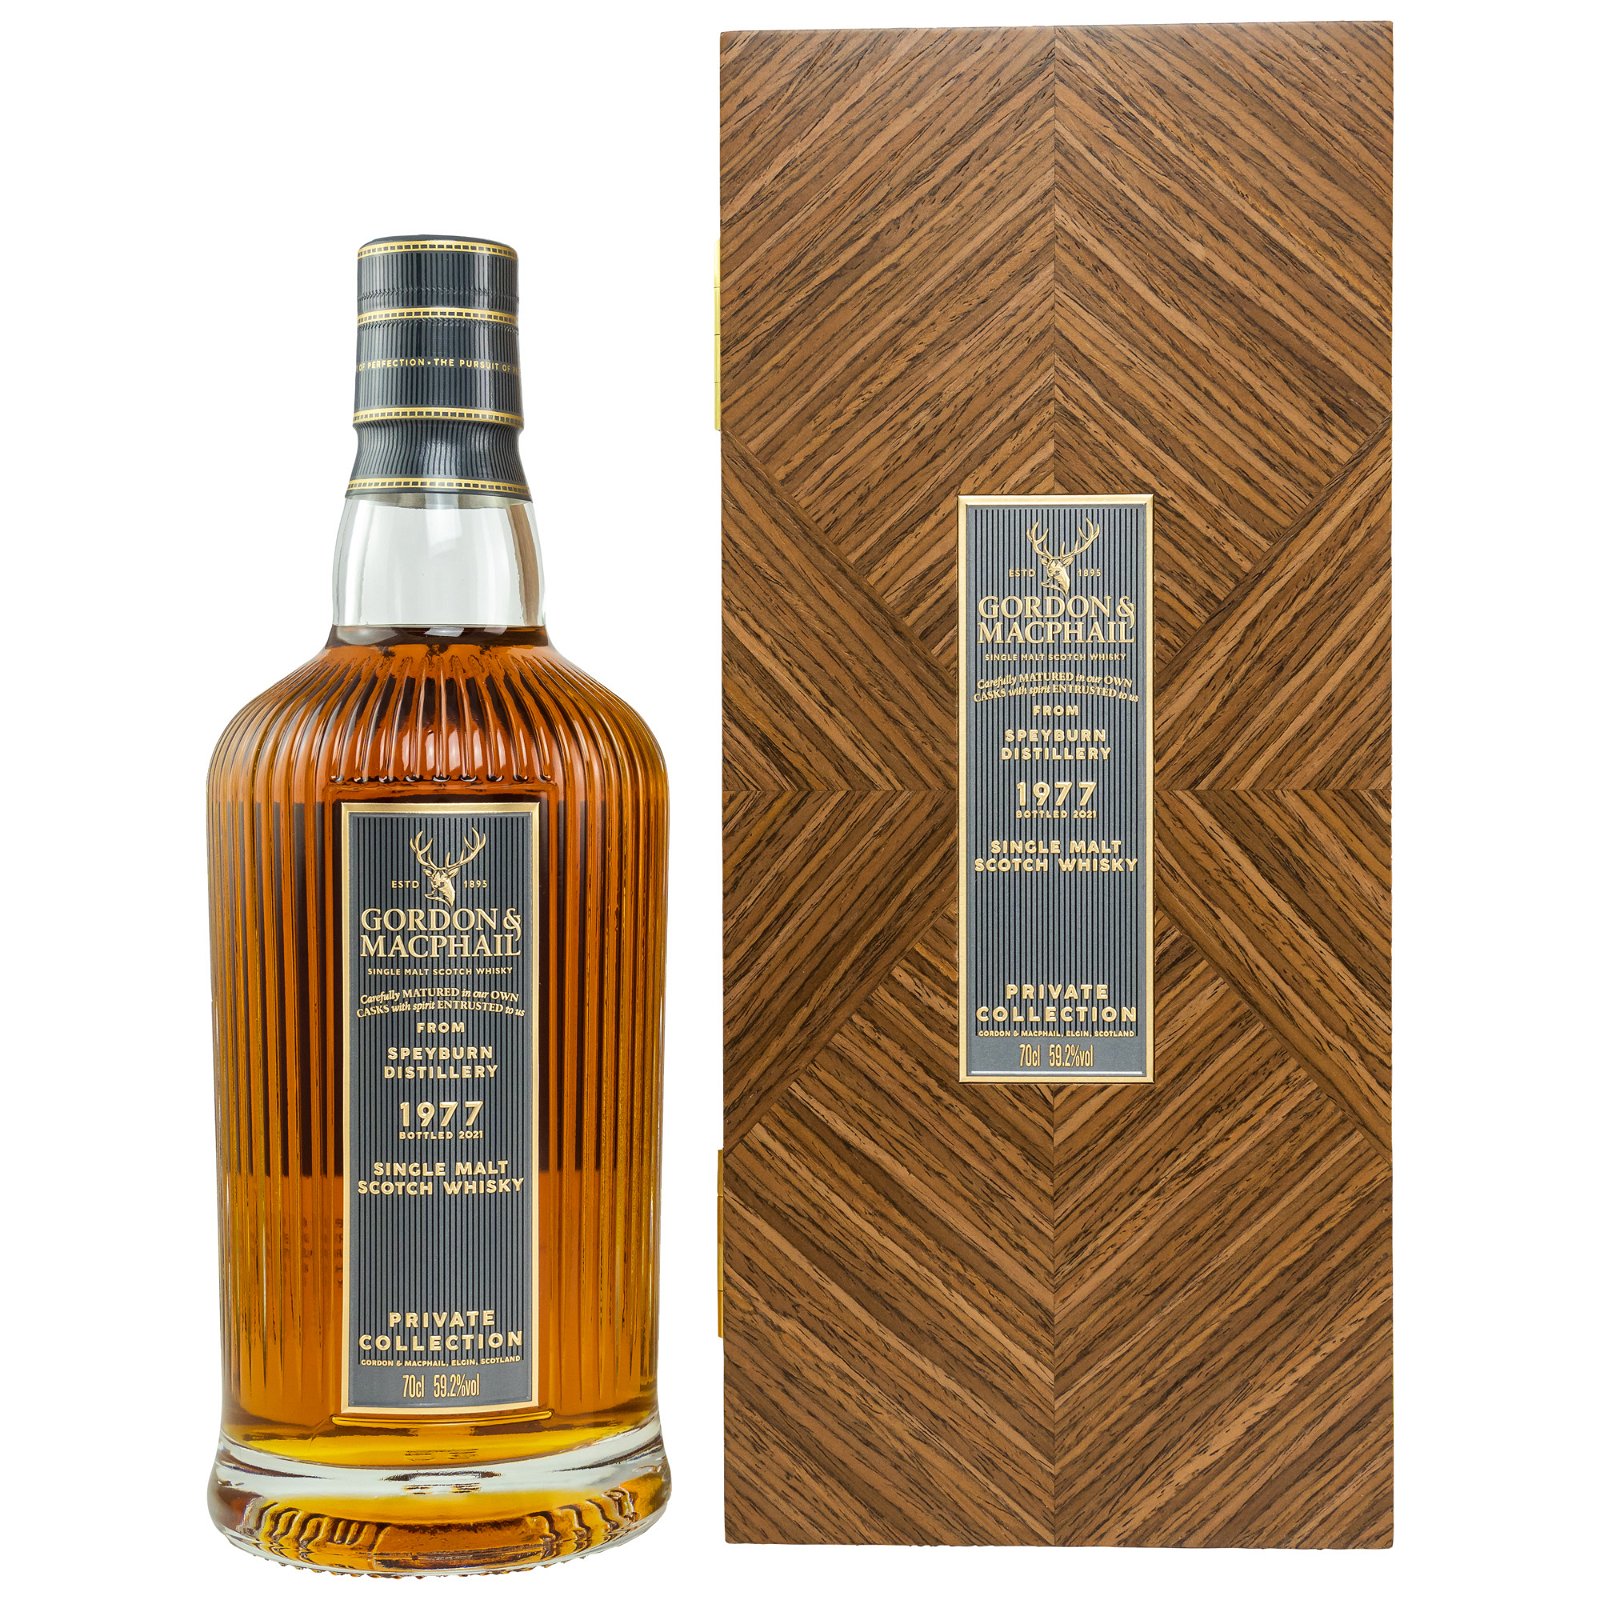 Speyburn 1977/2021 Refill Sherry Butt No. 6045101 Private Collection (Gordon & MacPhail)